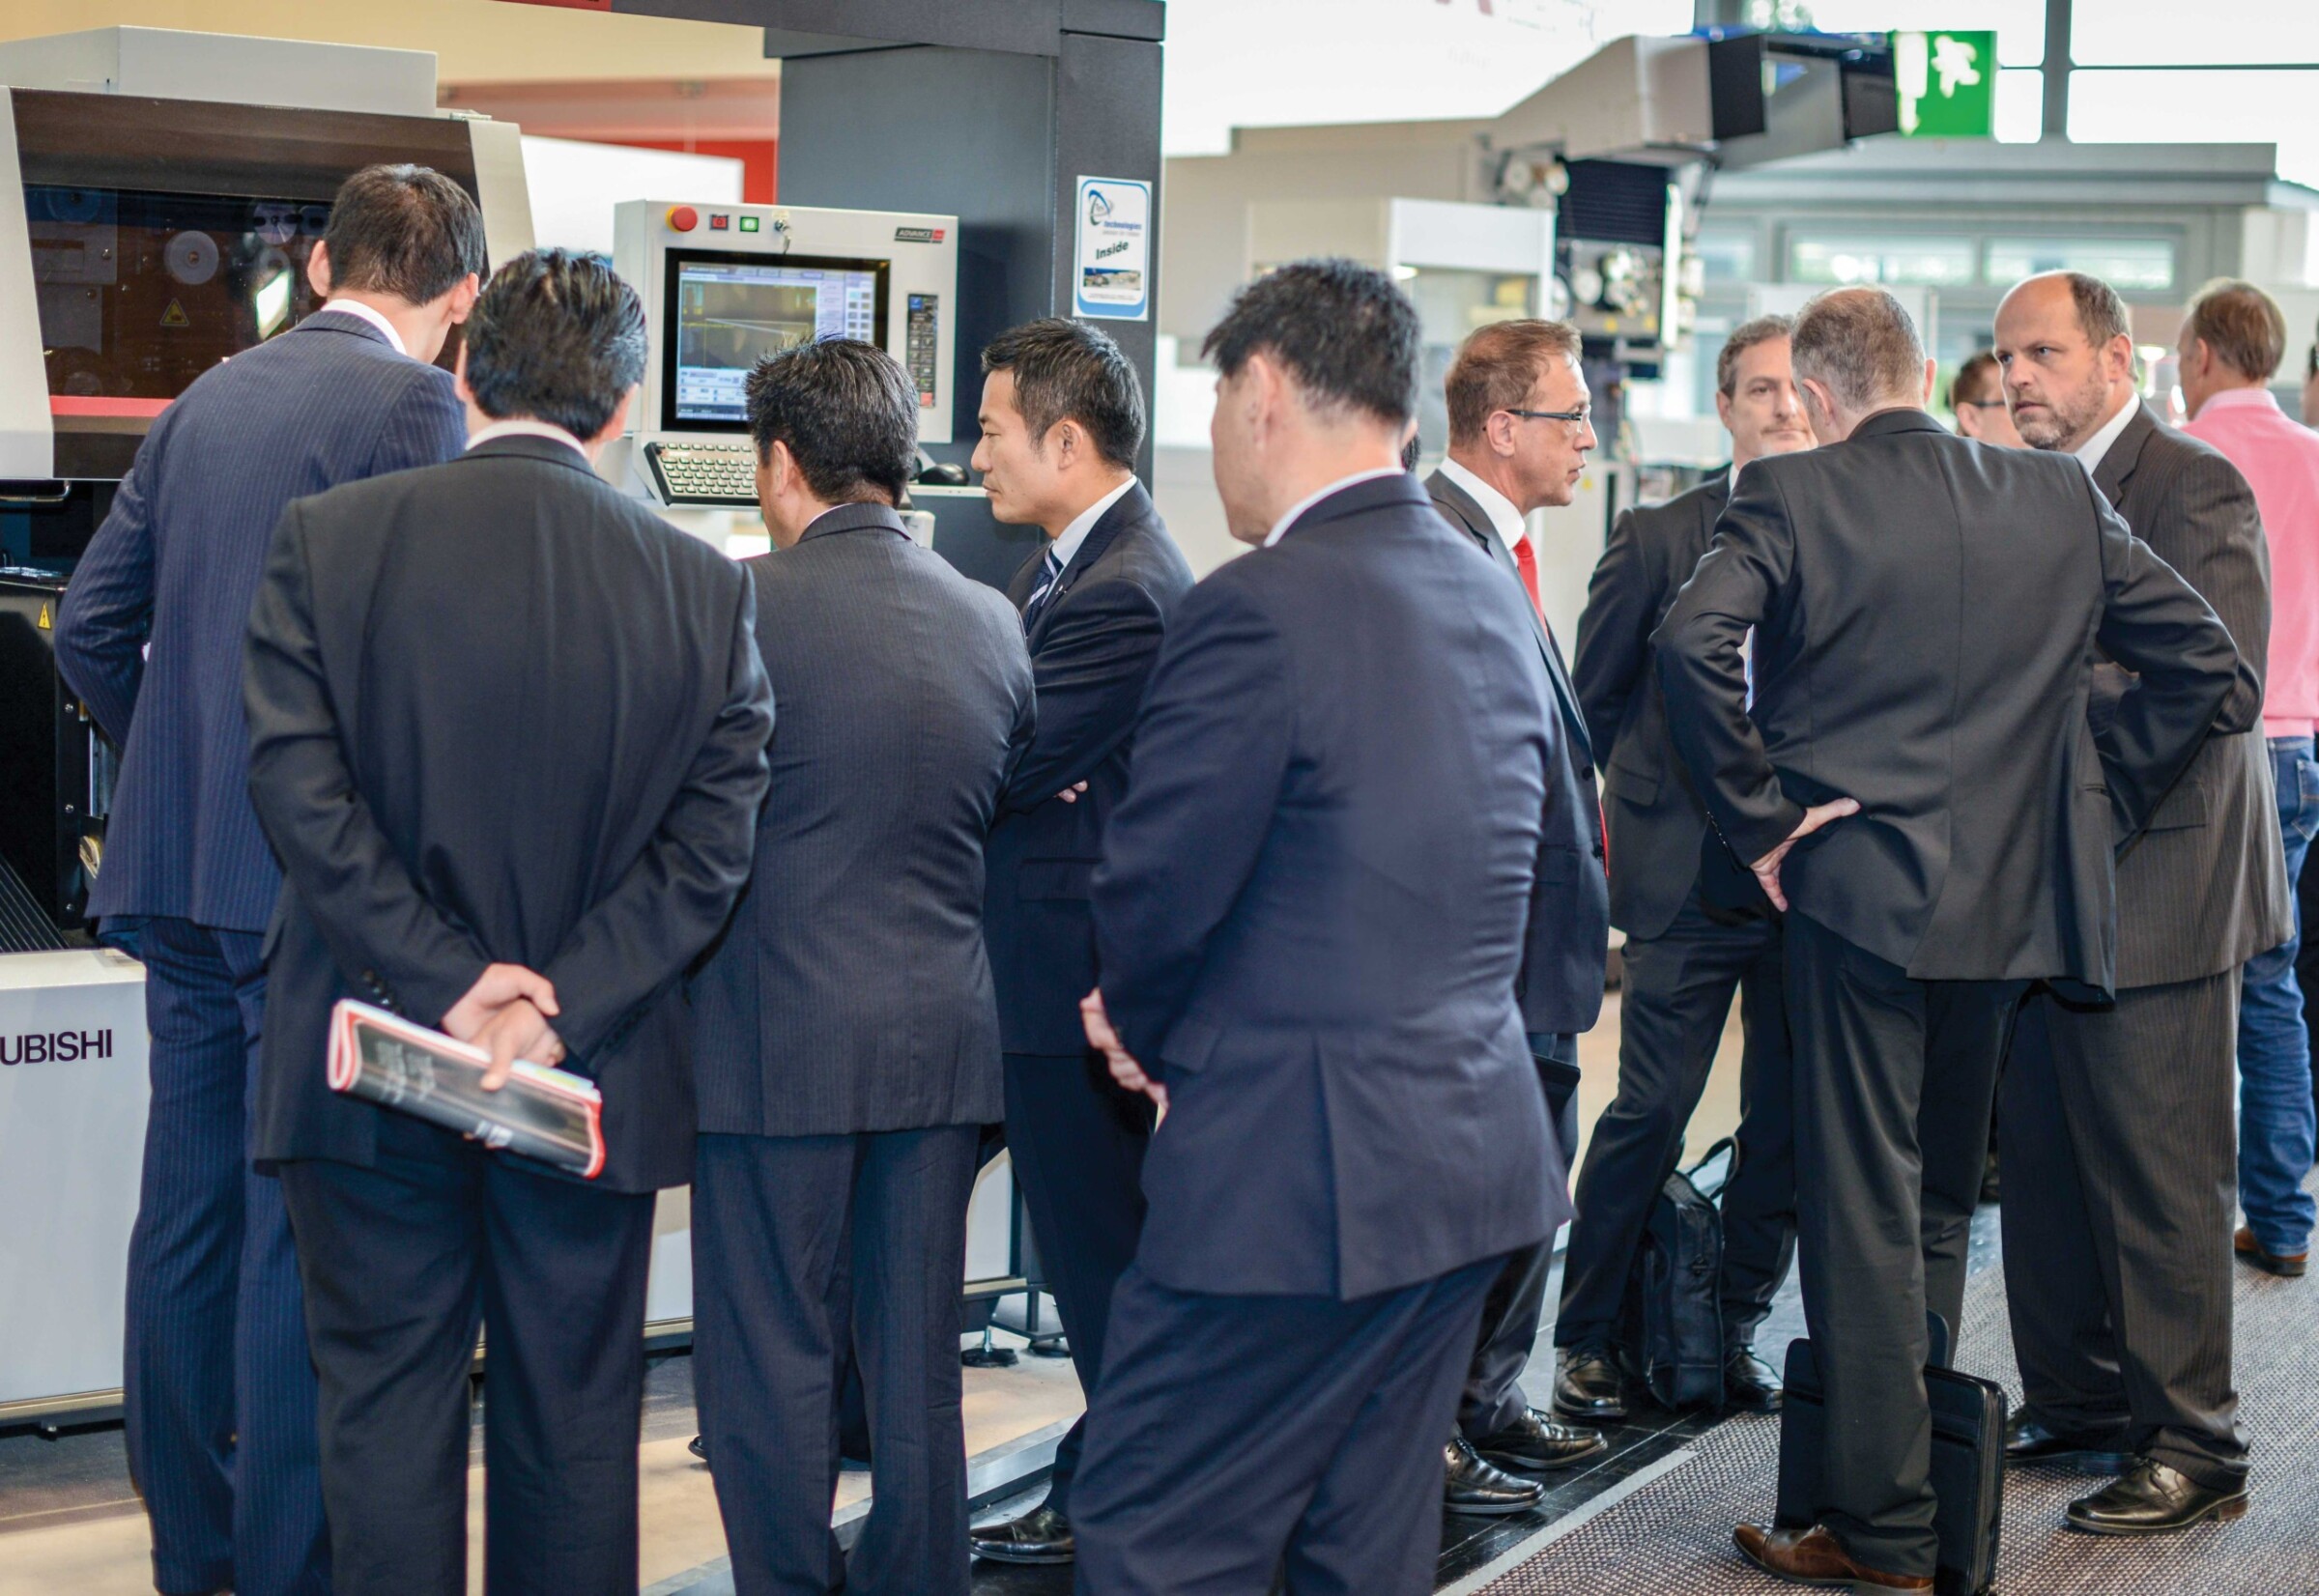 With so much to see, visitors flocked to the Mitsubishi Electric fair stand.